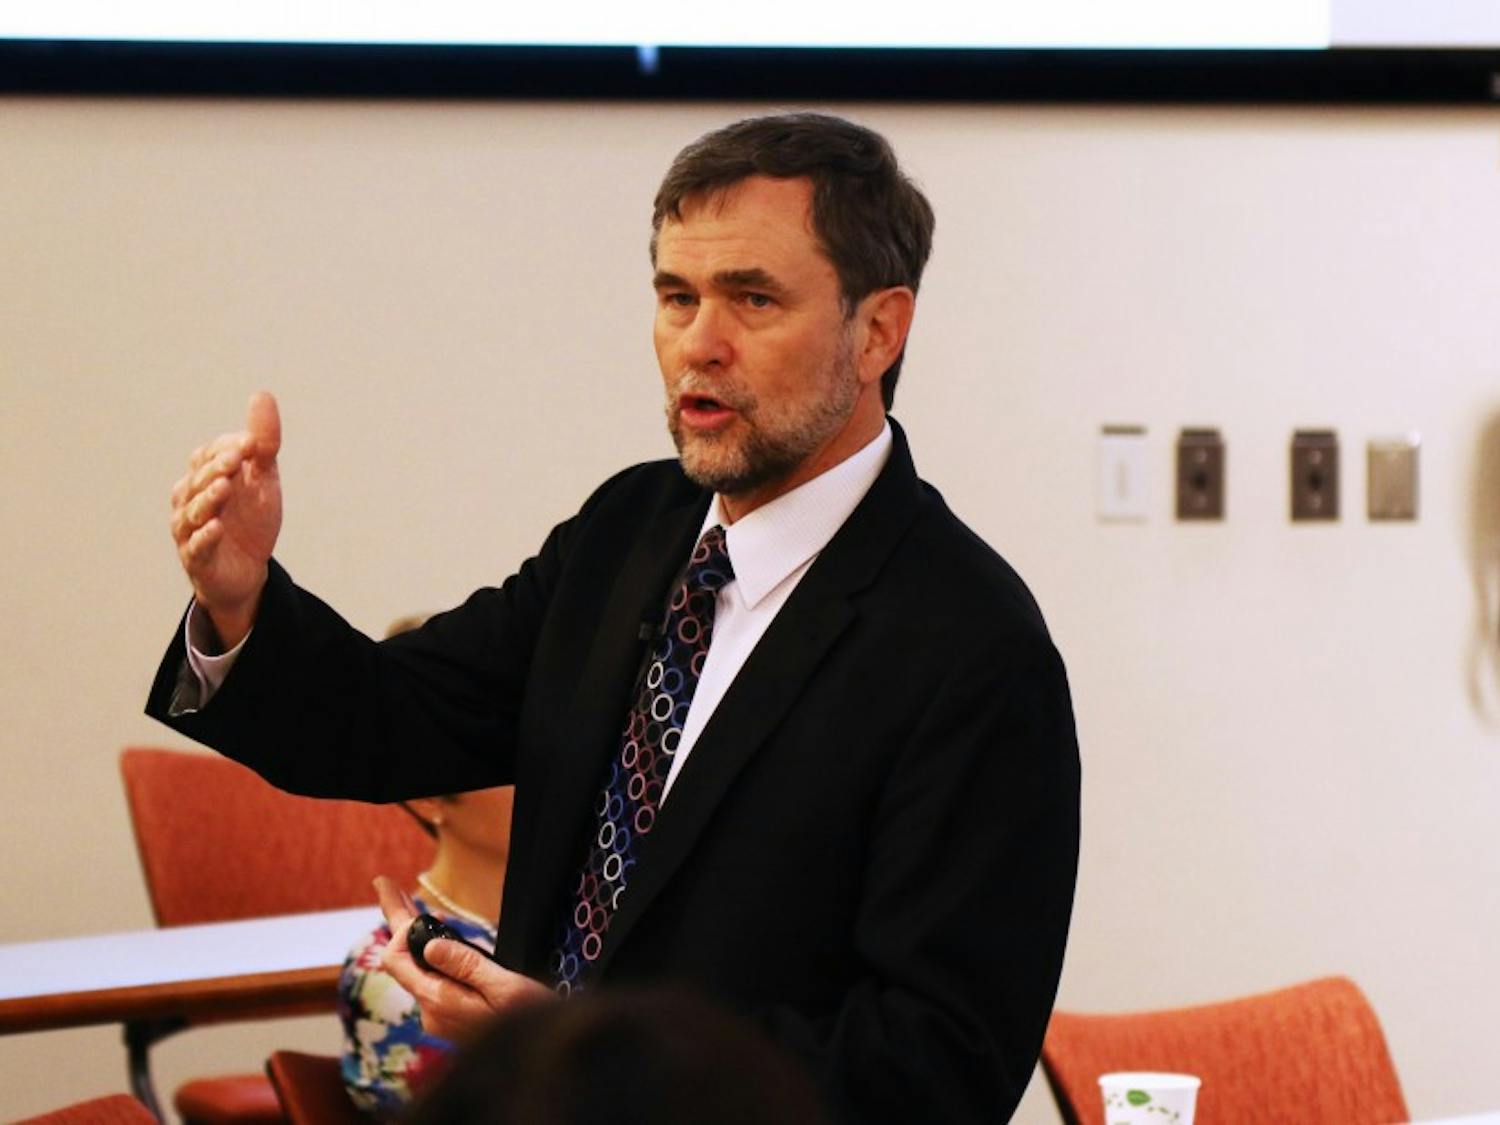 Steven Radelet,&nbsp;former chief economist at the United States Agency for International Development, noted that many people have misconceptions about successes in developing countries.